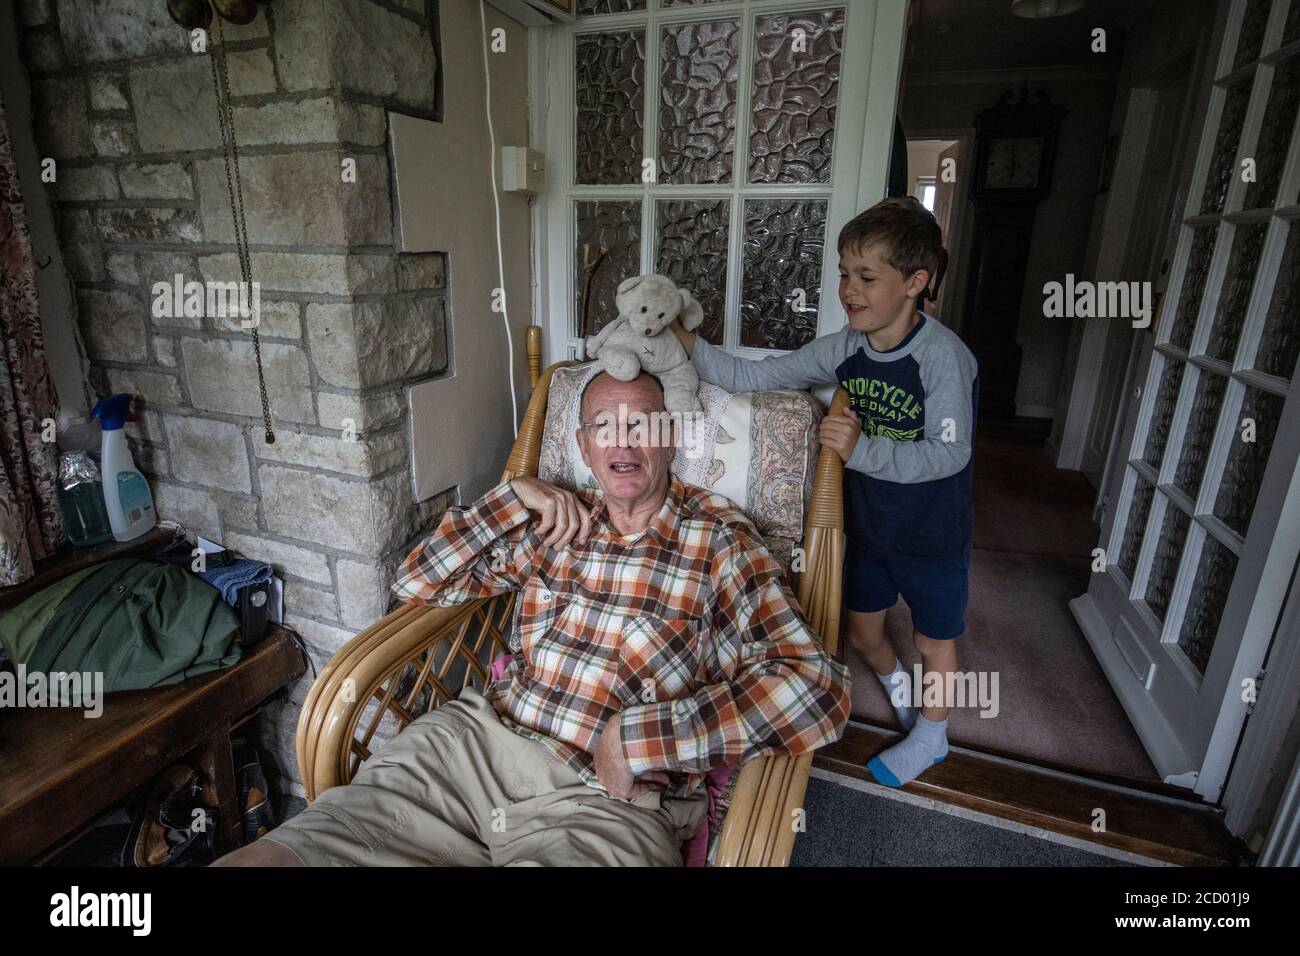 Grandfather at home enjoying the company of his 6 year old grandson, Wales, United Kingdom Stock Photo